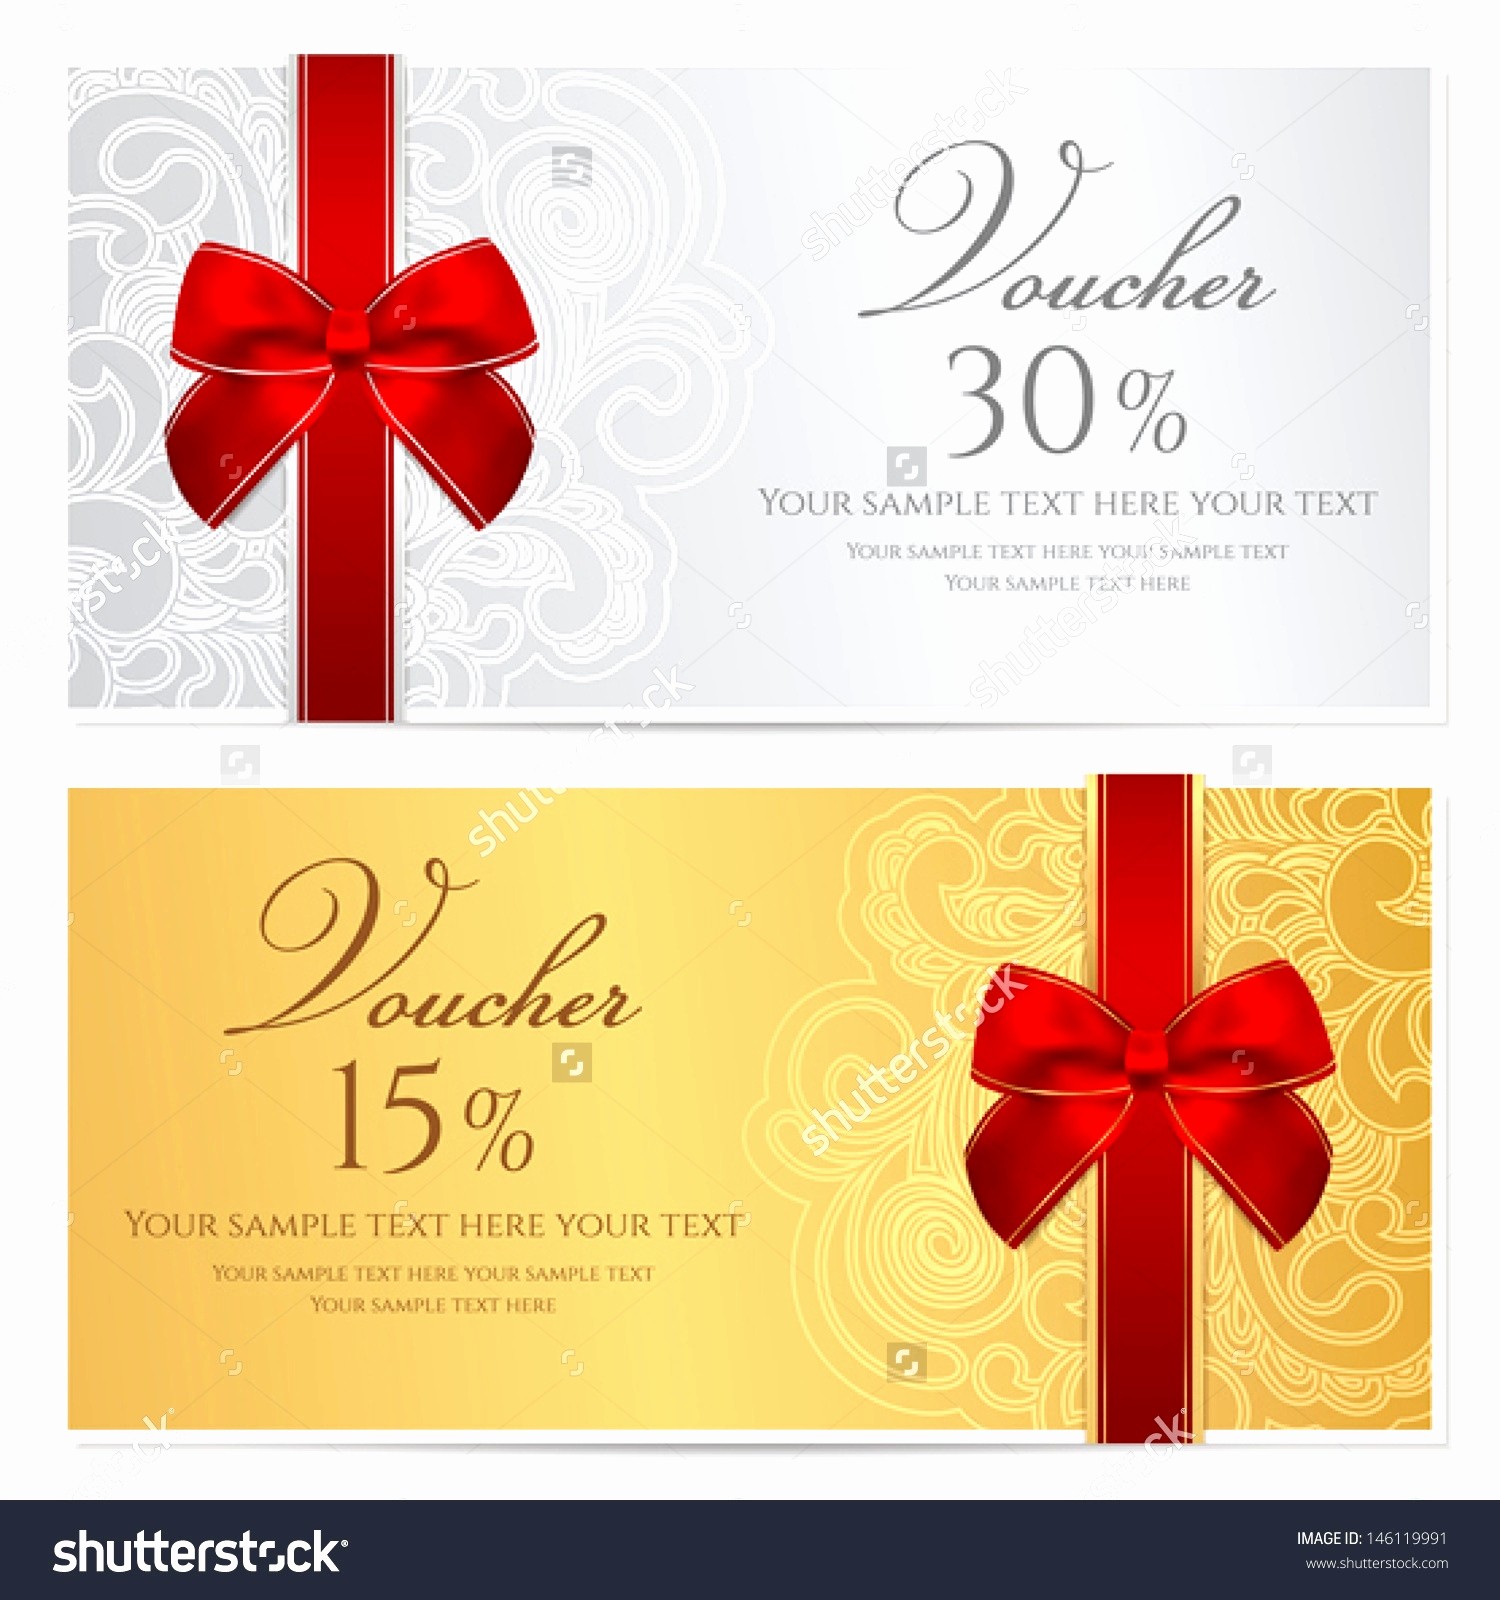 Printable Fake Gift Cards Inspirational Document